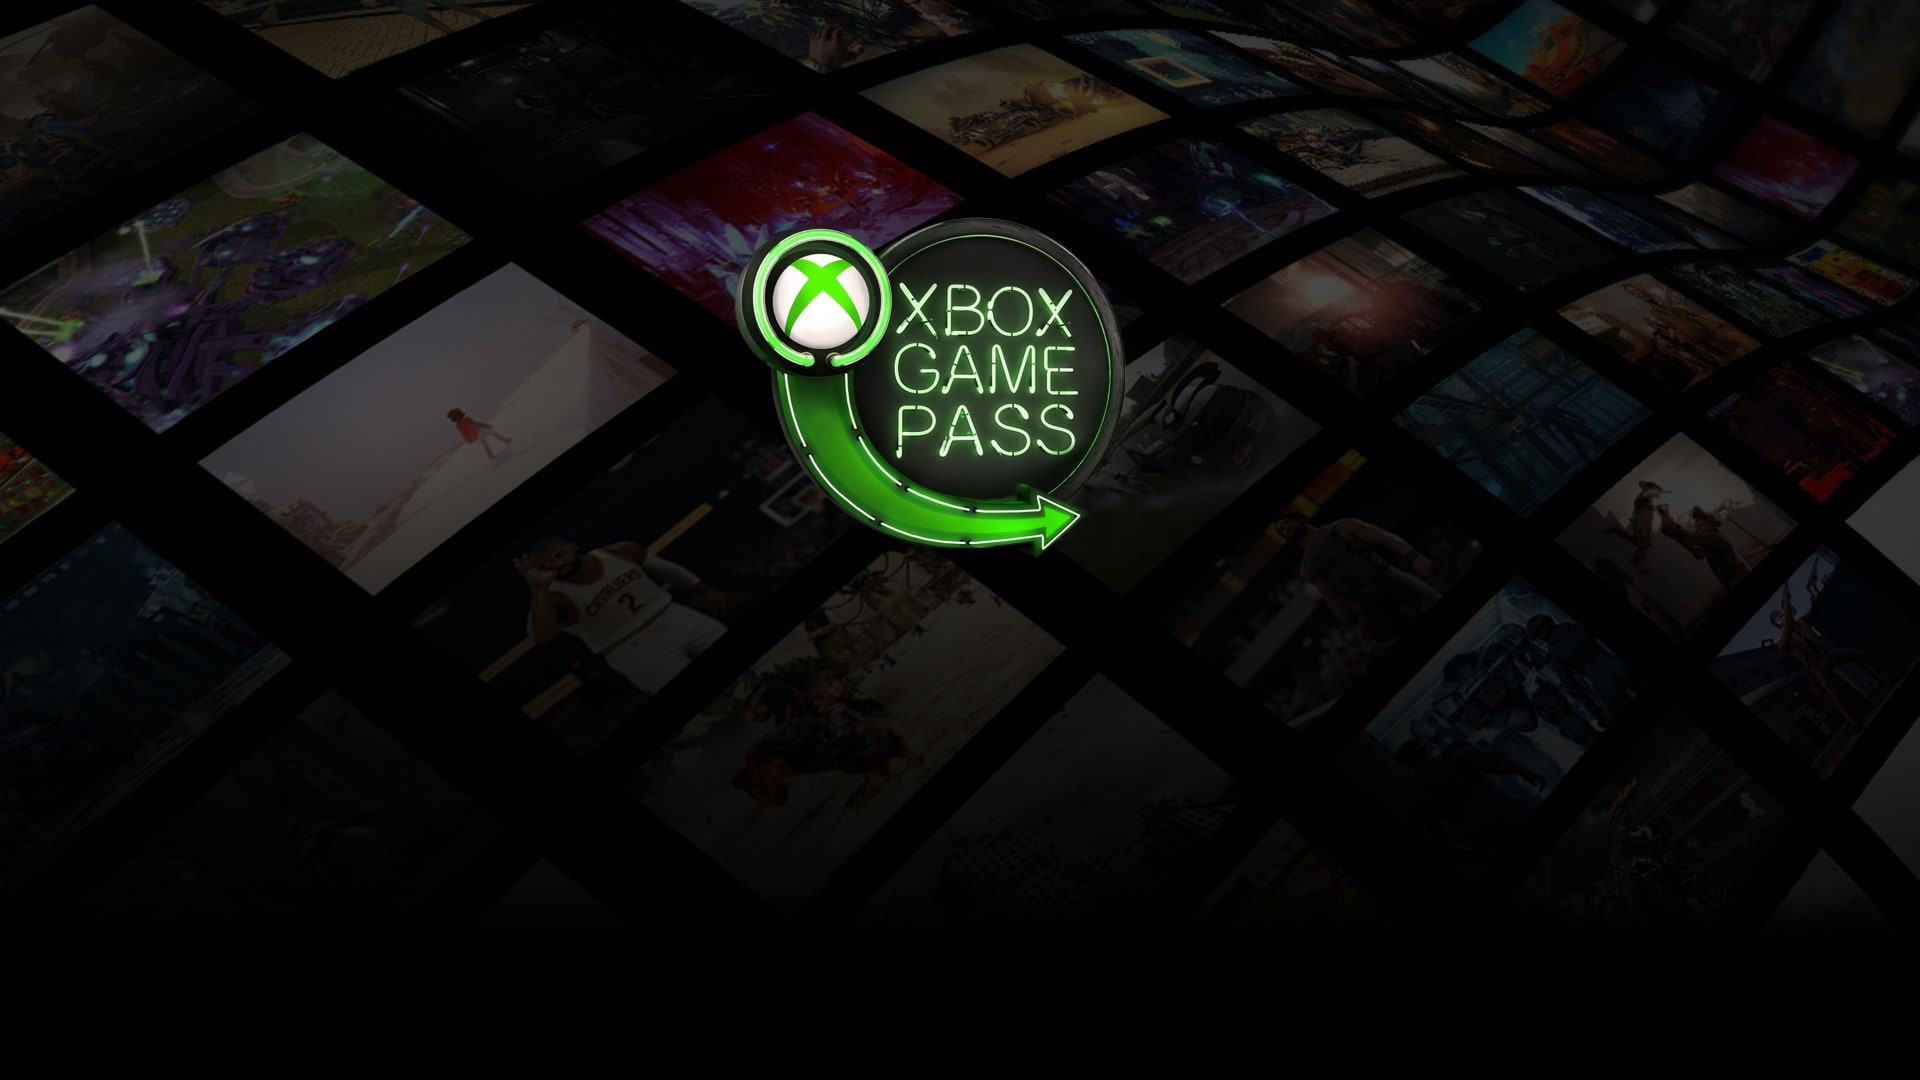 Microsoft S Xbox Game Pass Gamble Is Paying Off Gamedaily Biz